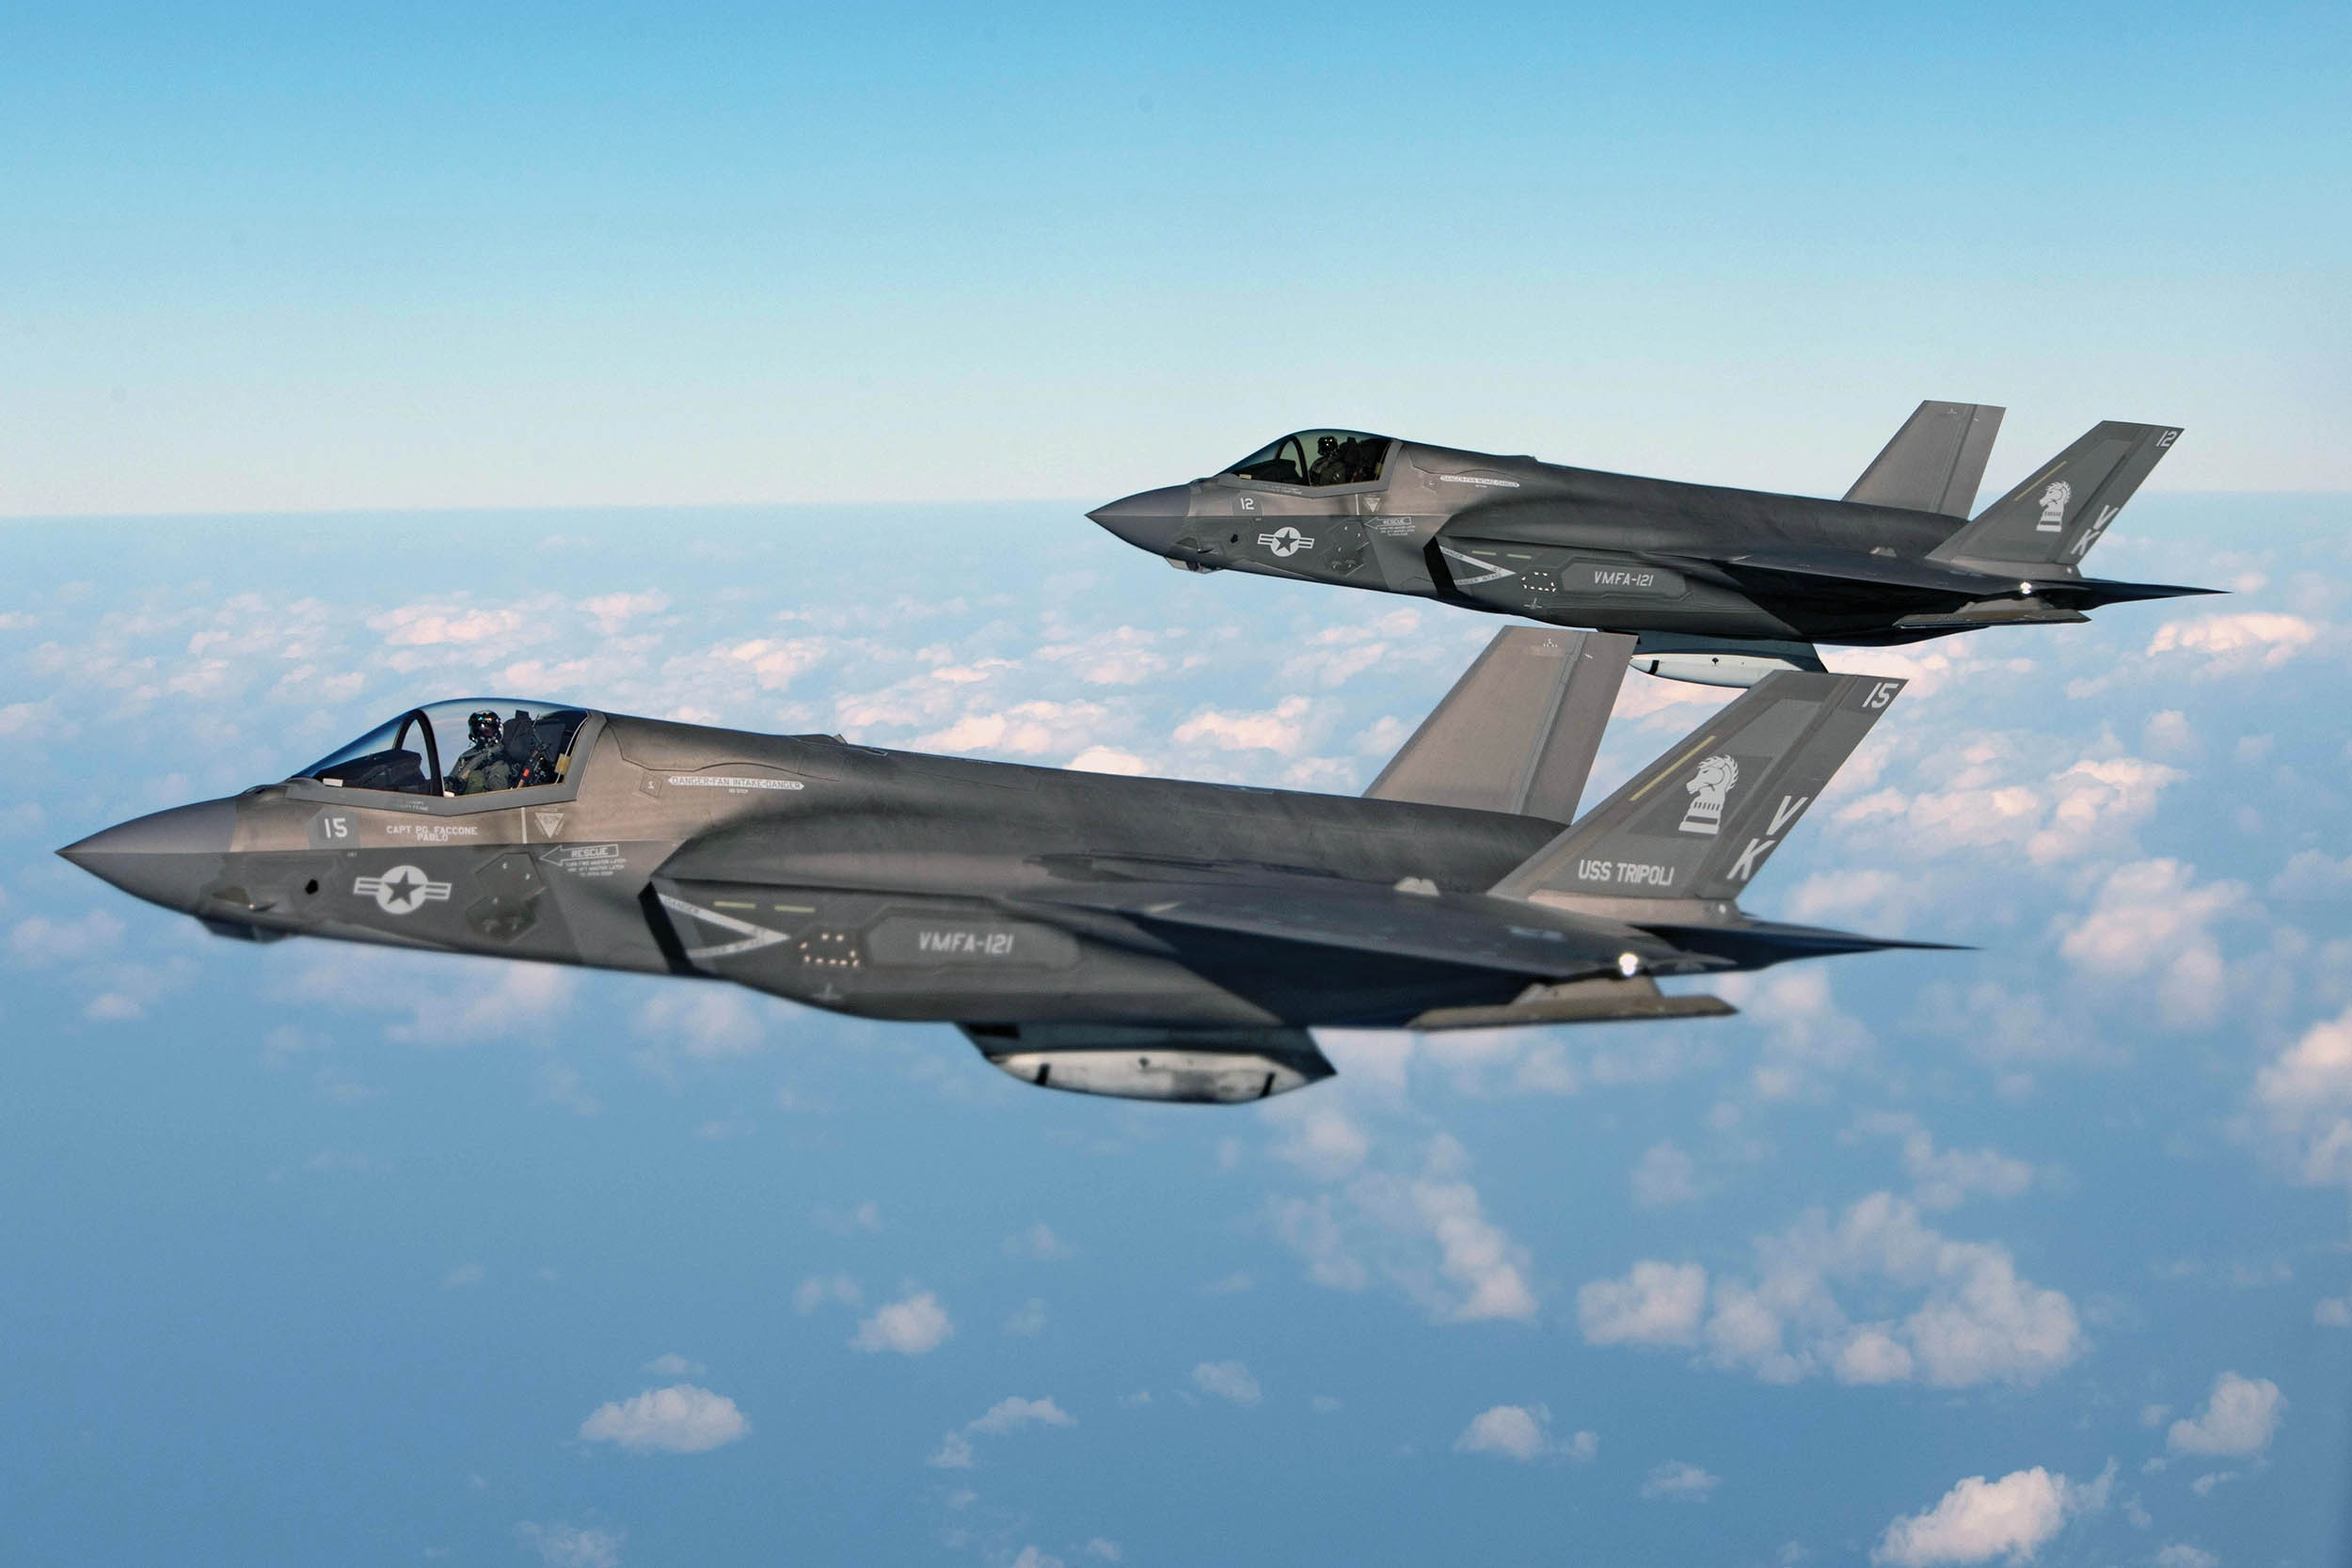 Marine Corps F-35B Lightning IIs, assigned to Marine Fighter Attack Squadron 121 from Marine Corps Air Station Iwakuni, fly alongside Air Force KC-135 Stratotanker over Pacific Ocean, January 19, 2023 (U.S. Air Force/Tylir Meyer)